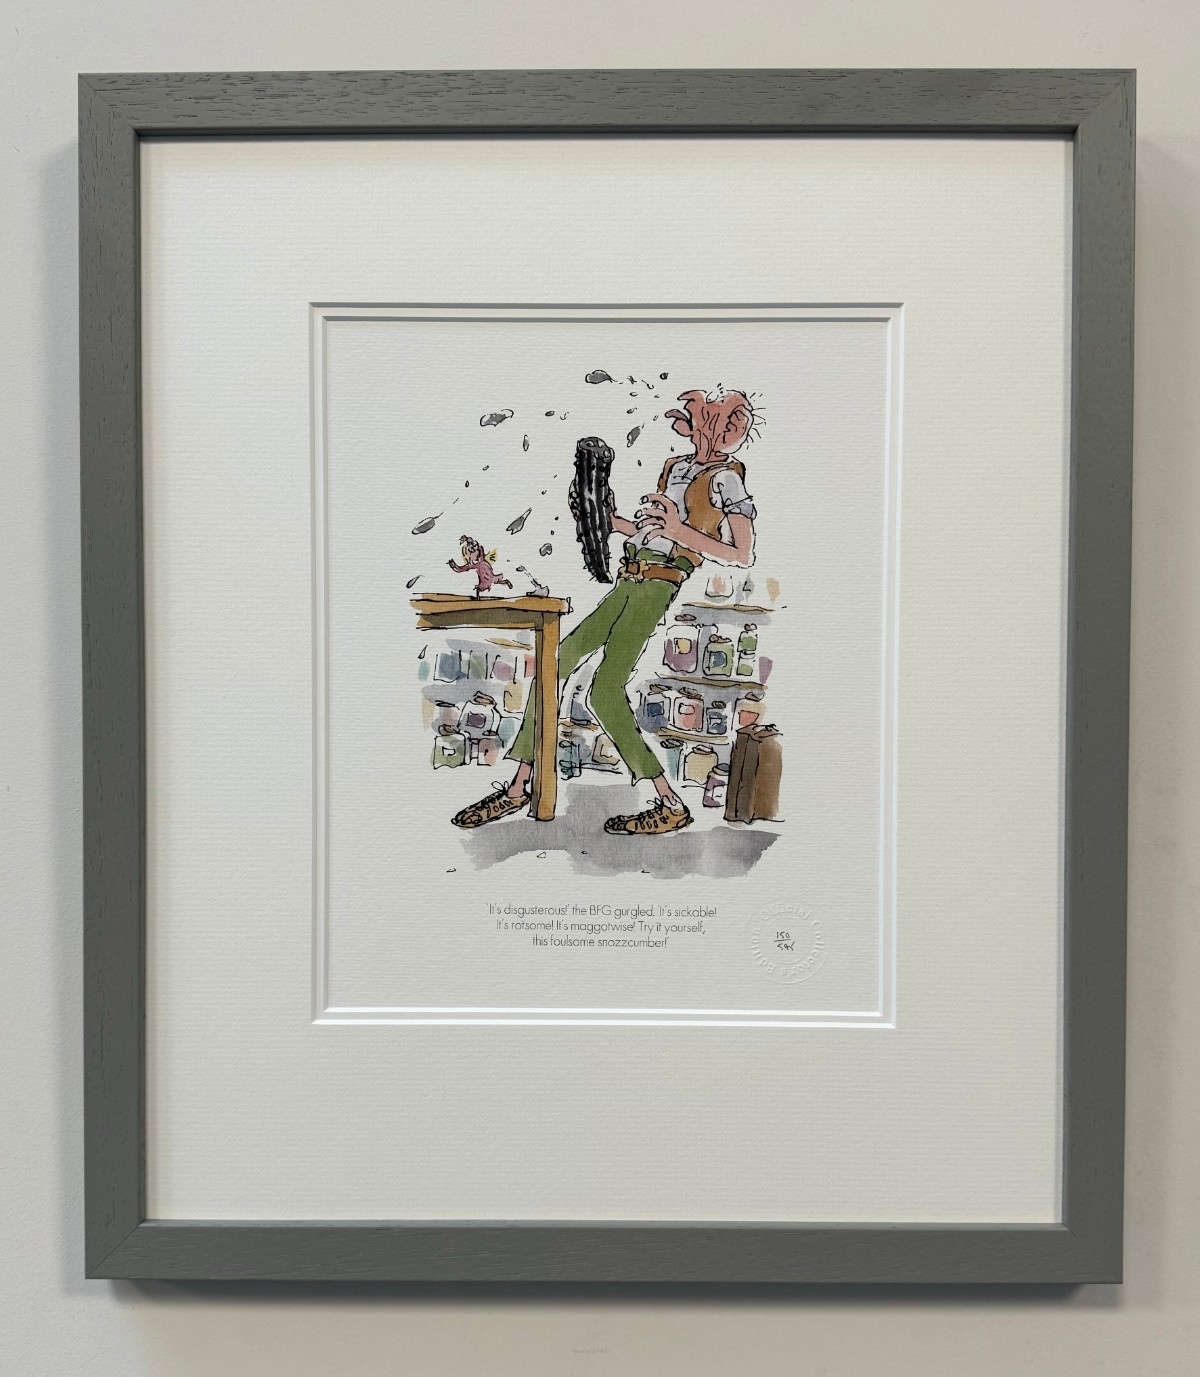 Its Disgusterous! the BFG gurgled by Quentin Blake